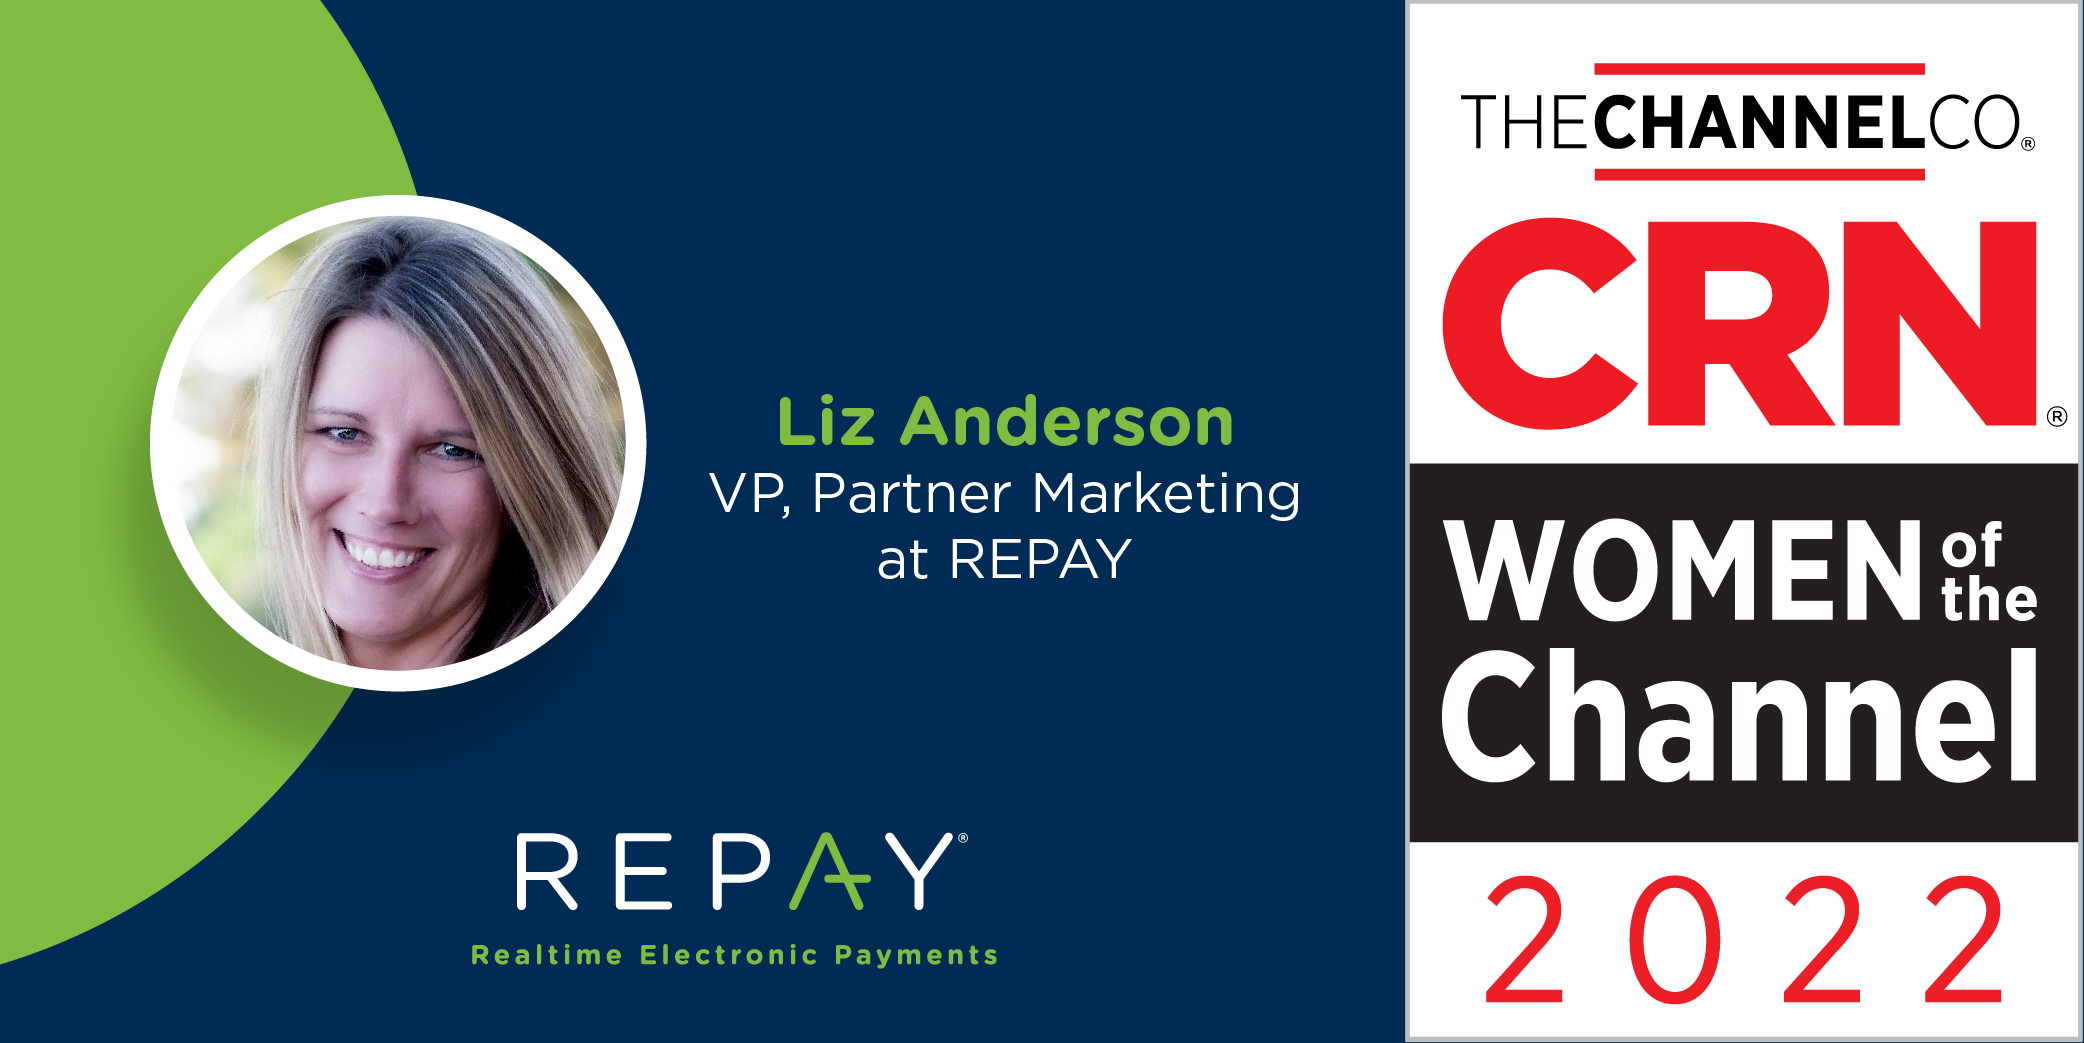 REPAY’s Liz Anderson Named to CRN’s Women of the Channel List for the Sixth Consecutive Year